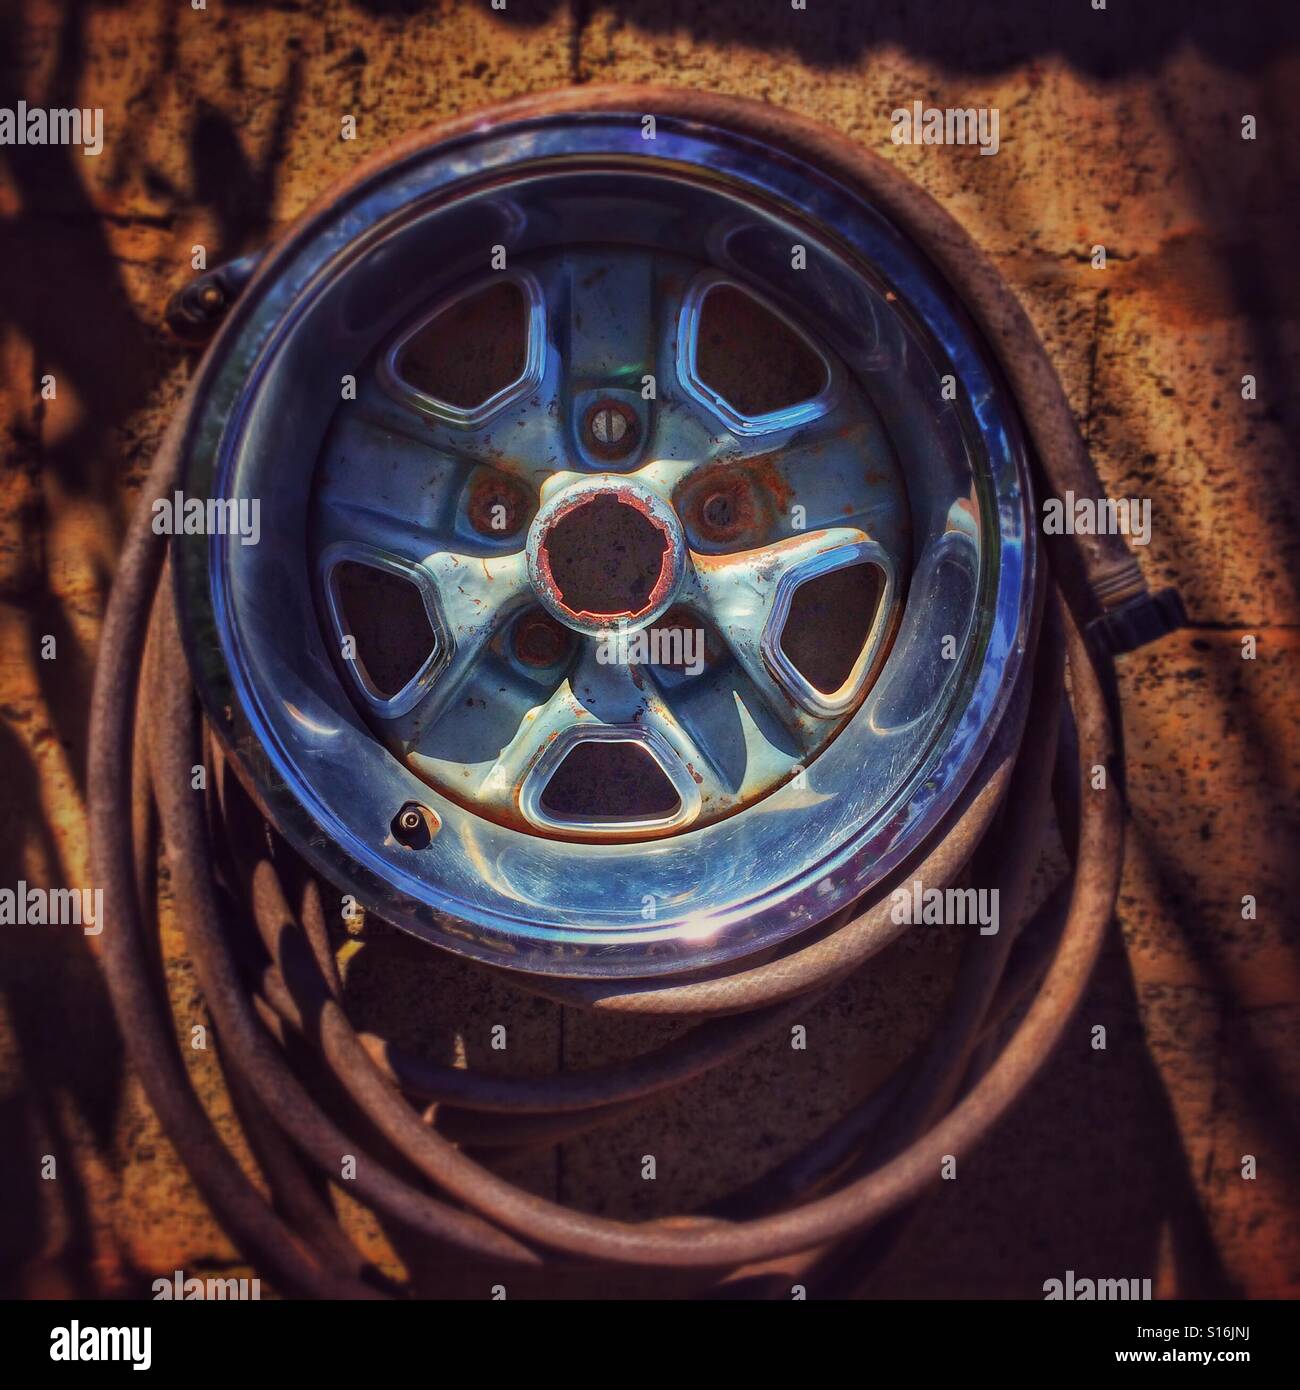 Hubcap and hose Stock Photo